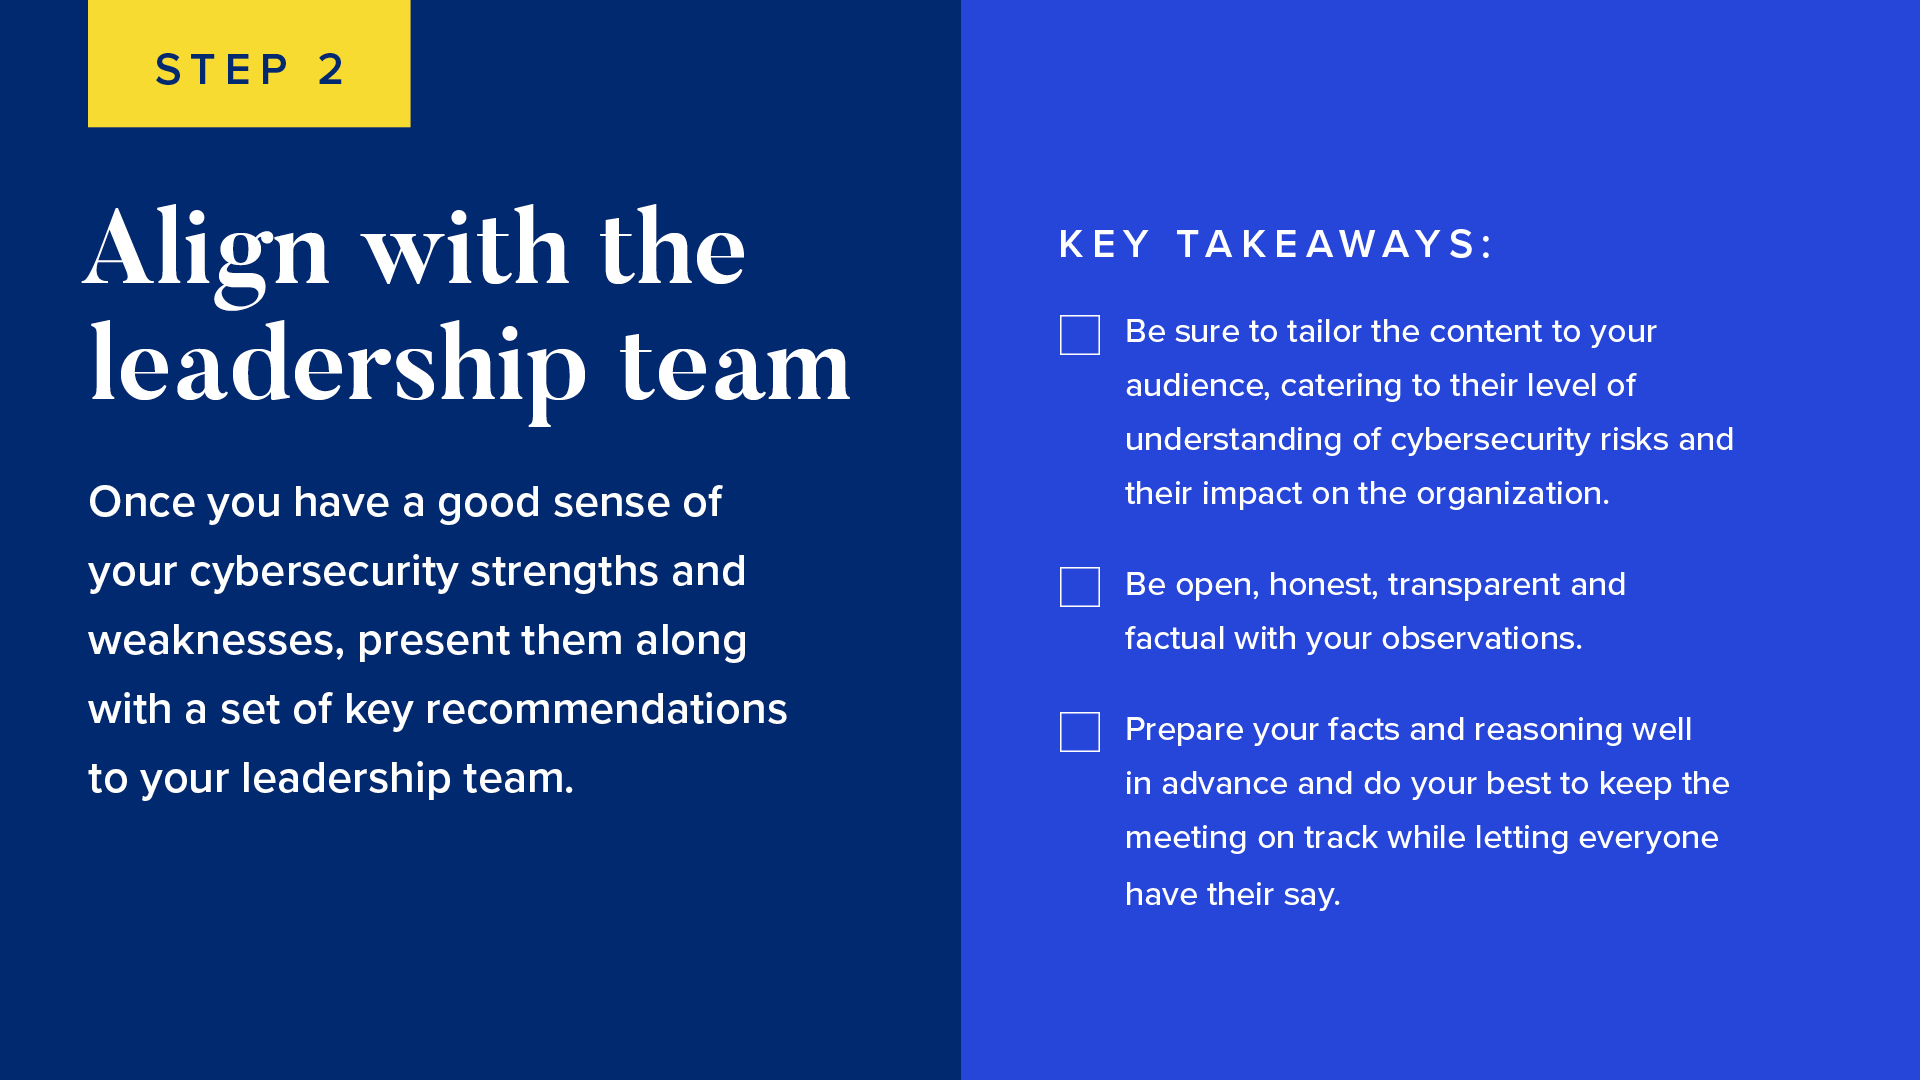 INFOGRAPHIC #2: Align with the leadership team 
Once you have a good sense of your cybersecurity strengths and weaknesses, present them along with a set of key recommendations to your leadership team. 


Be sure to tailor the content to your audience, catering to their level of understanding of cybersecurity risks and its impact on the organization.
Be open, honest, transparent and factual with your observations.
Prepare your facts and reasoning well in advance and do your best to keep the meeting on track while letting everyone have their say. 
